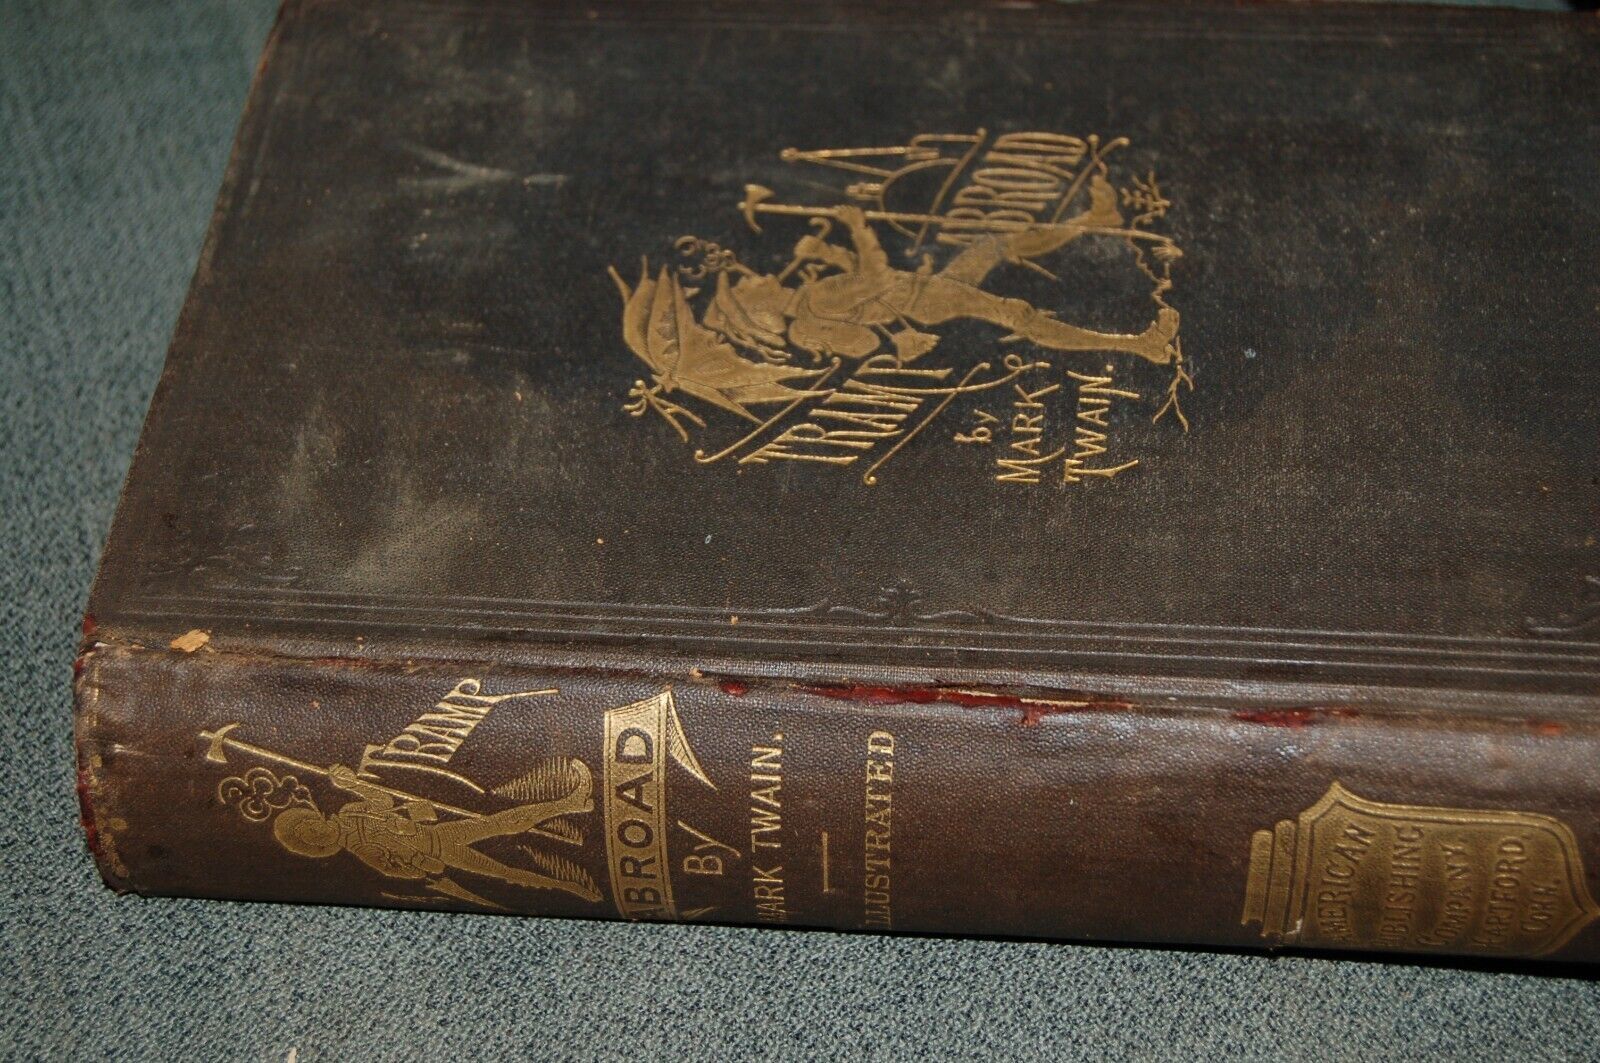 Primary image for 1880 "A Tramp Abroad" Written by Mark Twain 1st Edition 2nd state